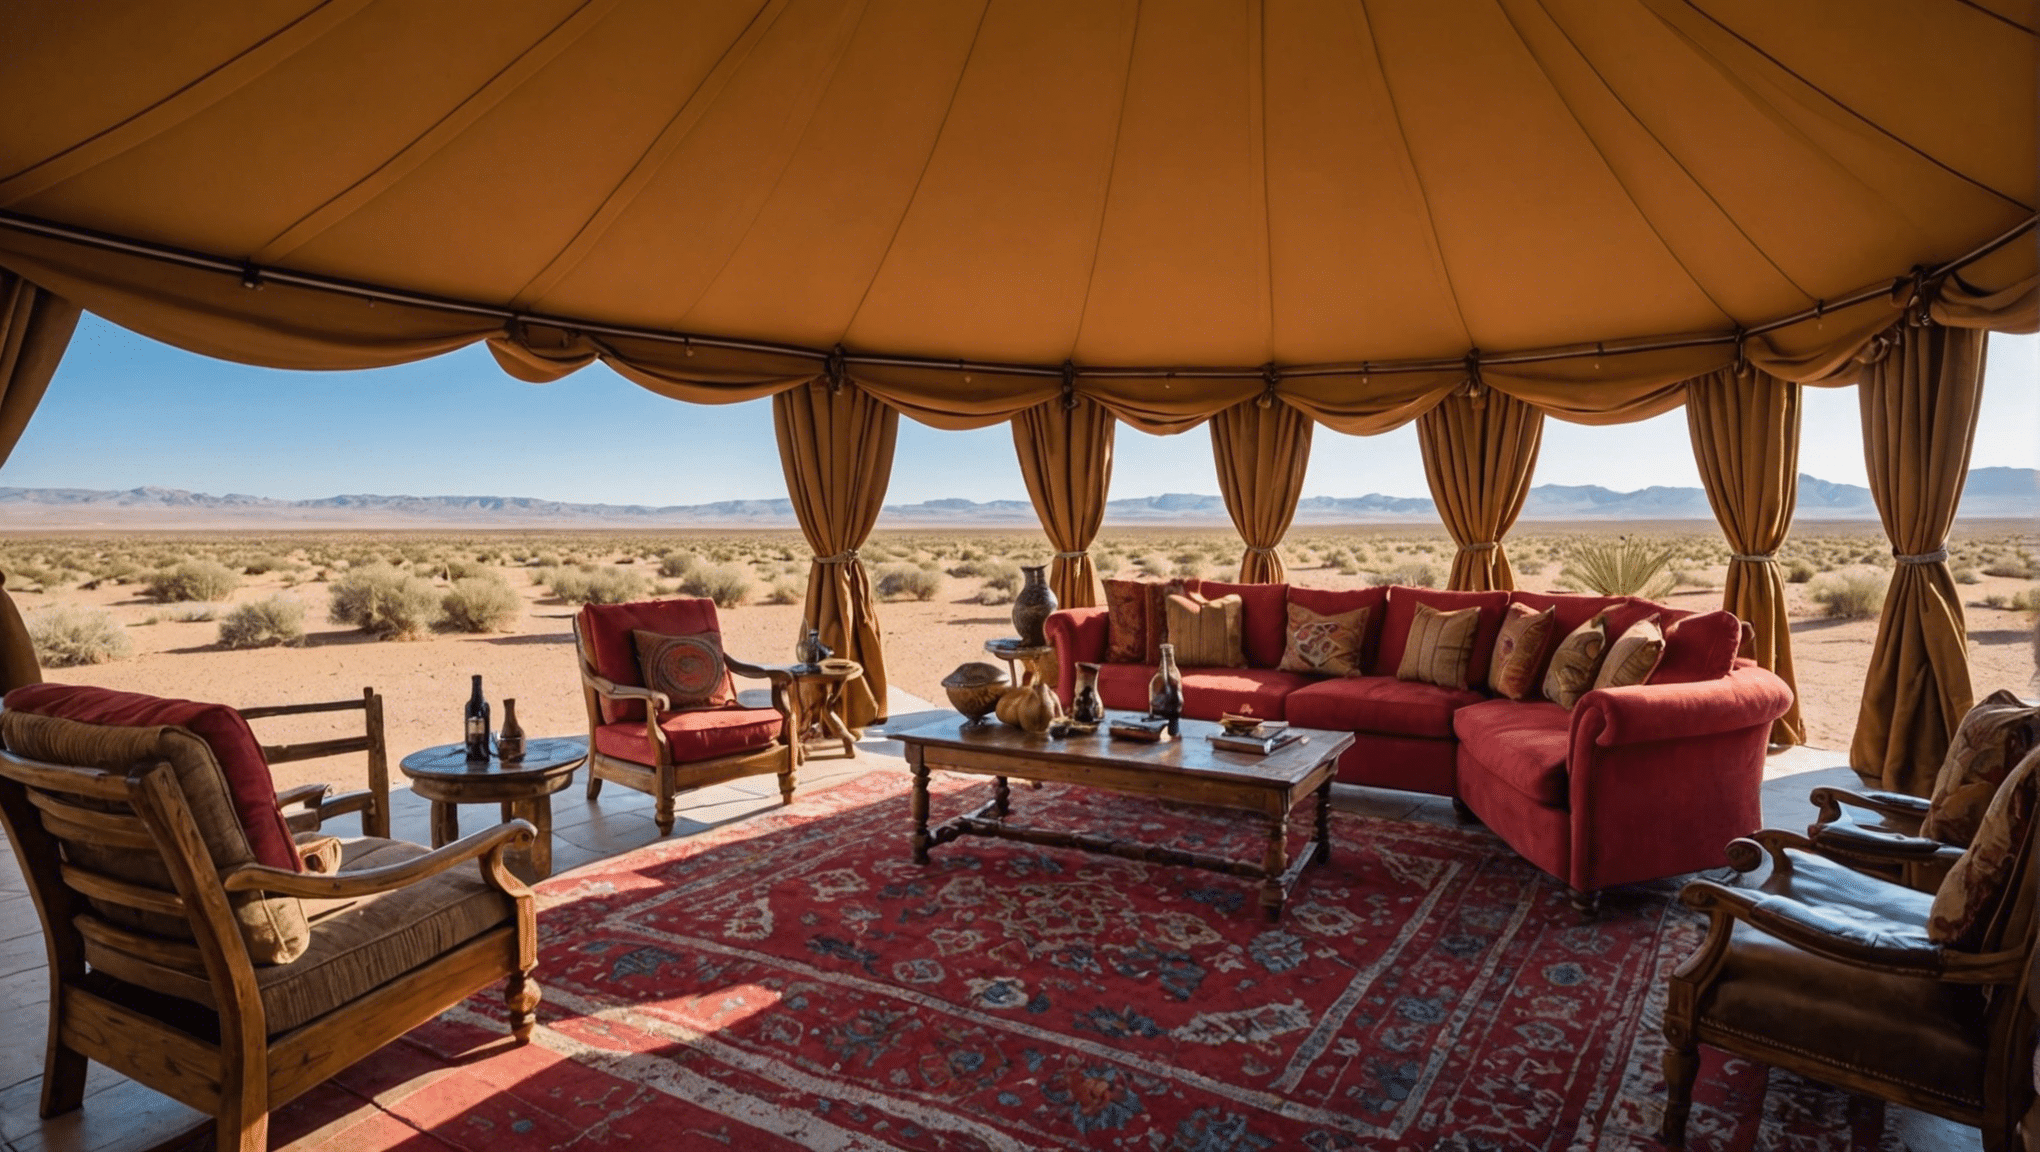 discover the epitome of luxury at agafay desert camps, the hottest trend near the red city. immerse yourself in an unforgettable experience.